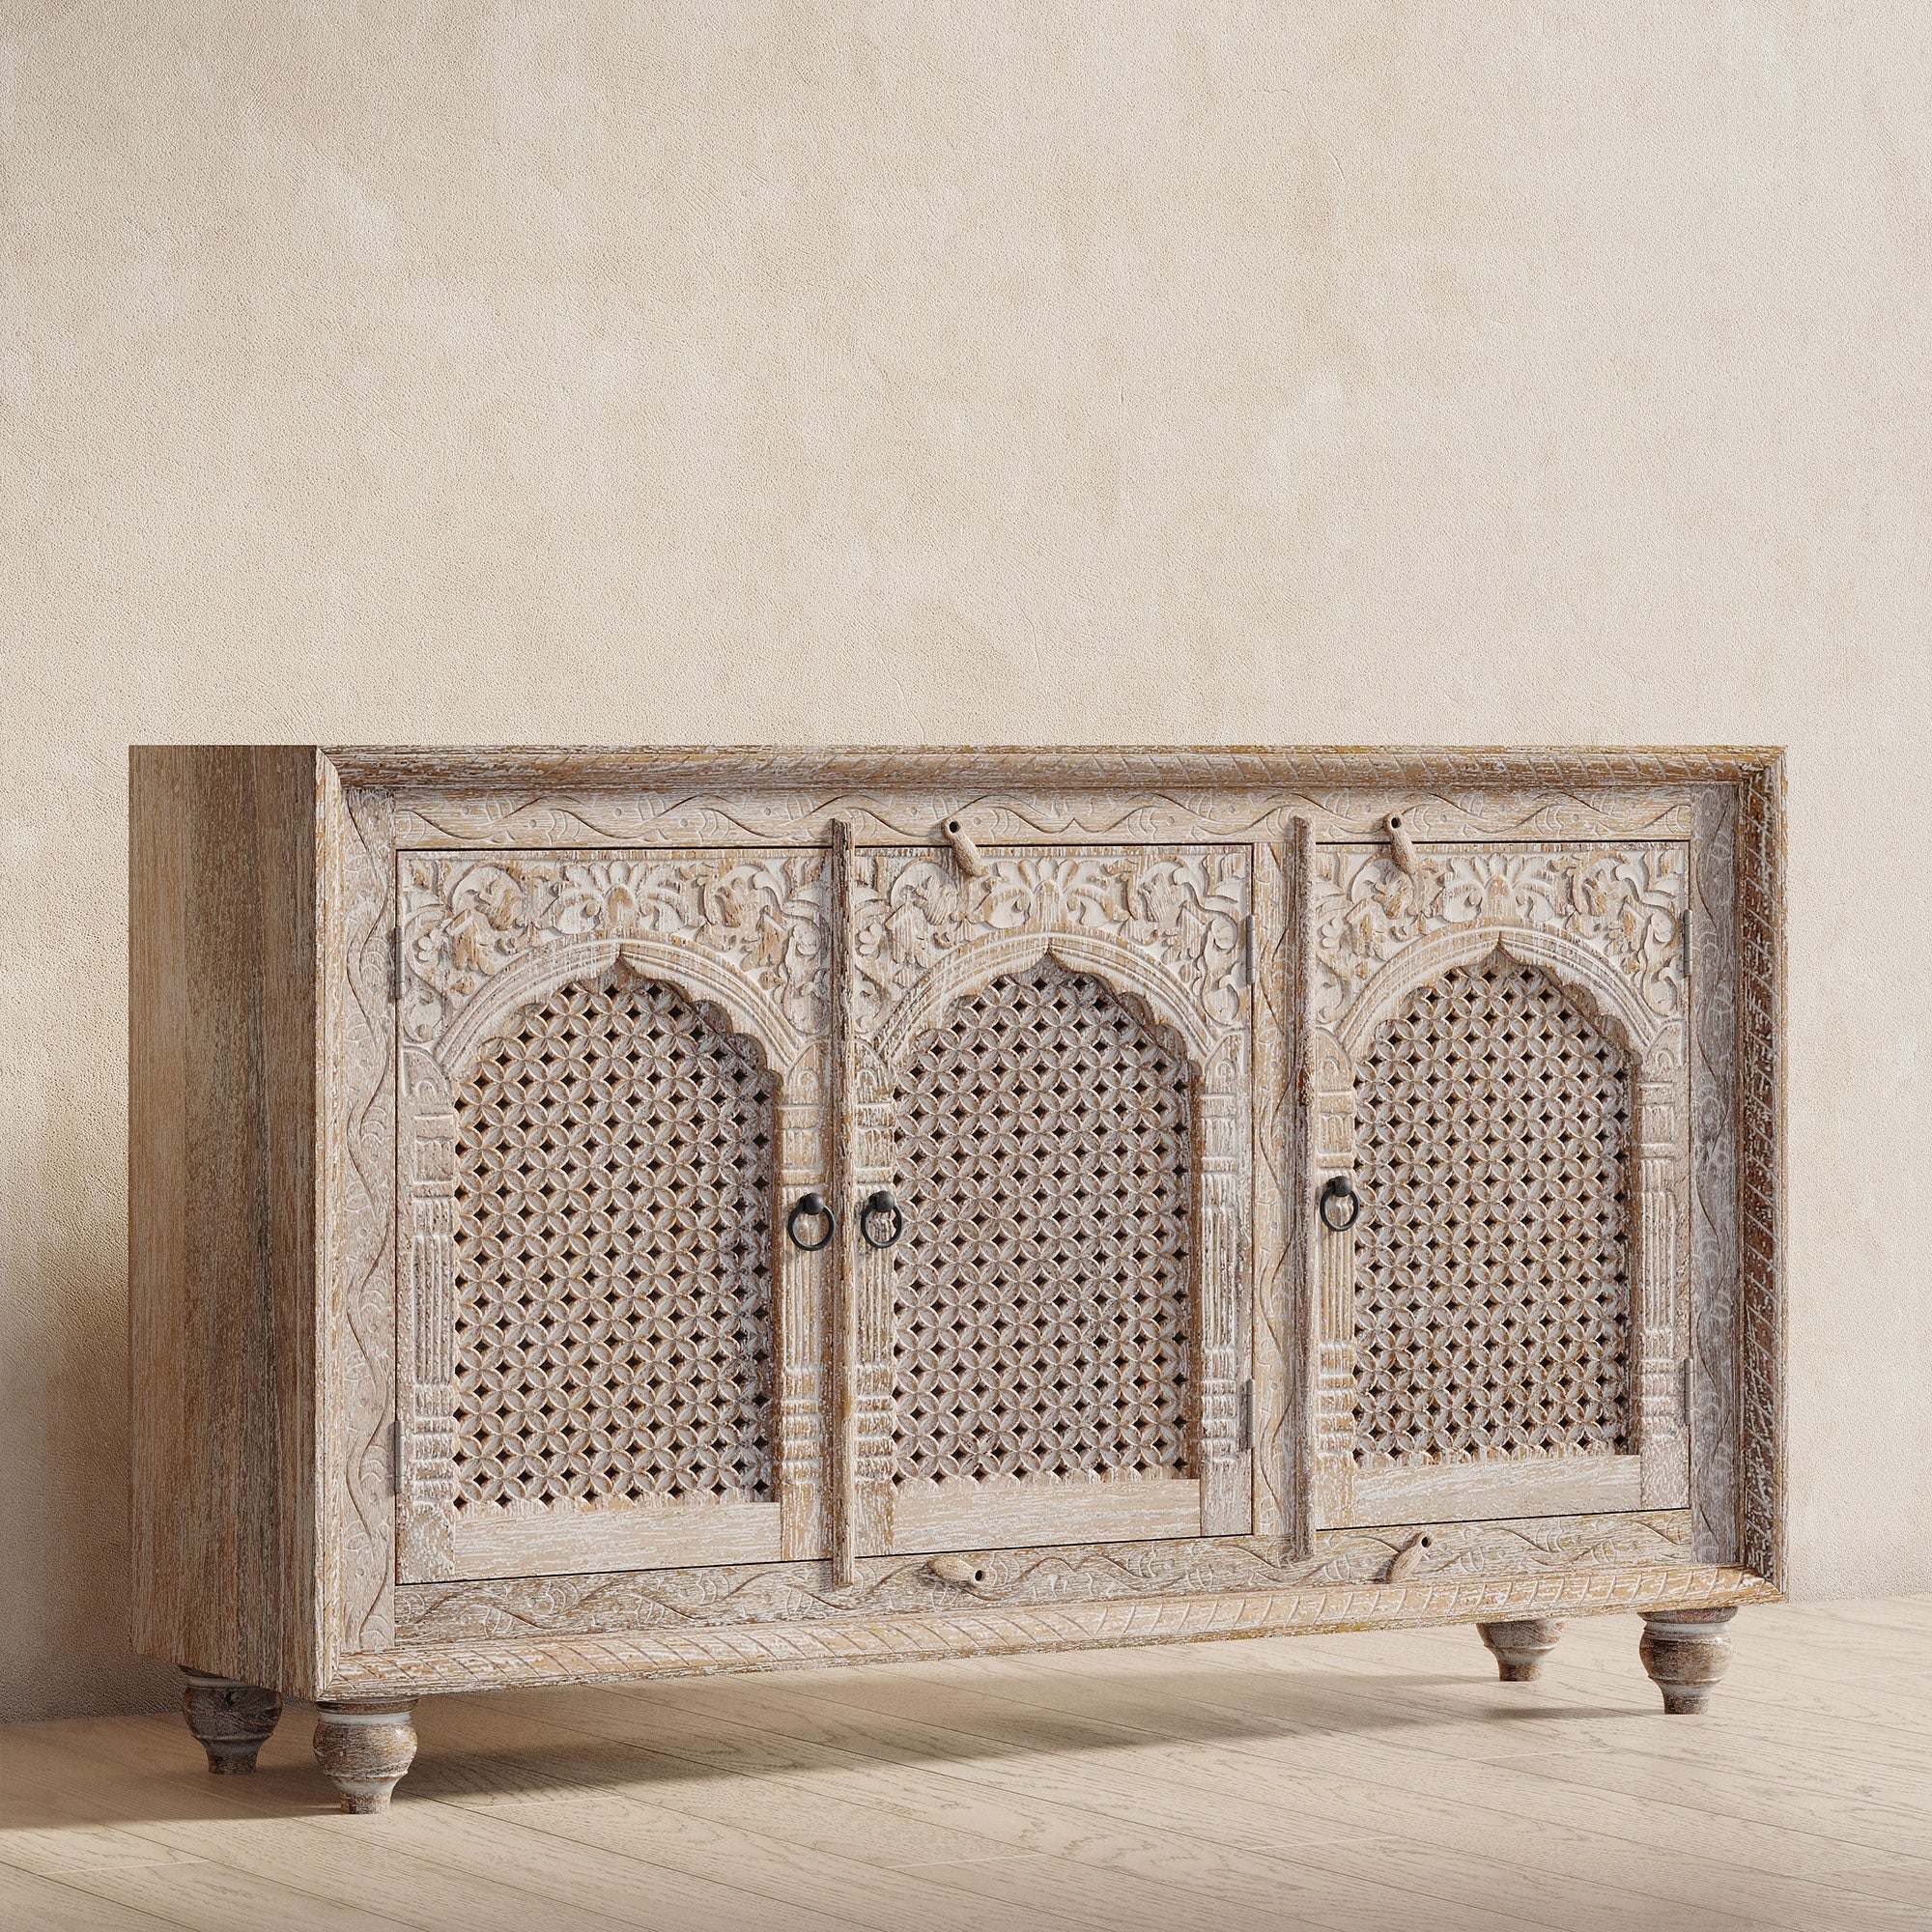 Patrin Nomad Wooden Sideboard in Distressed Natural Finish in Cabinets by VMInnovations